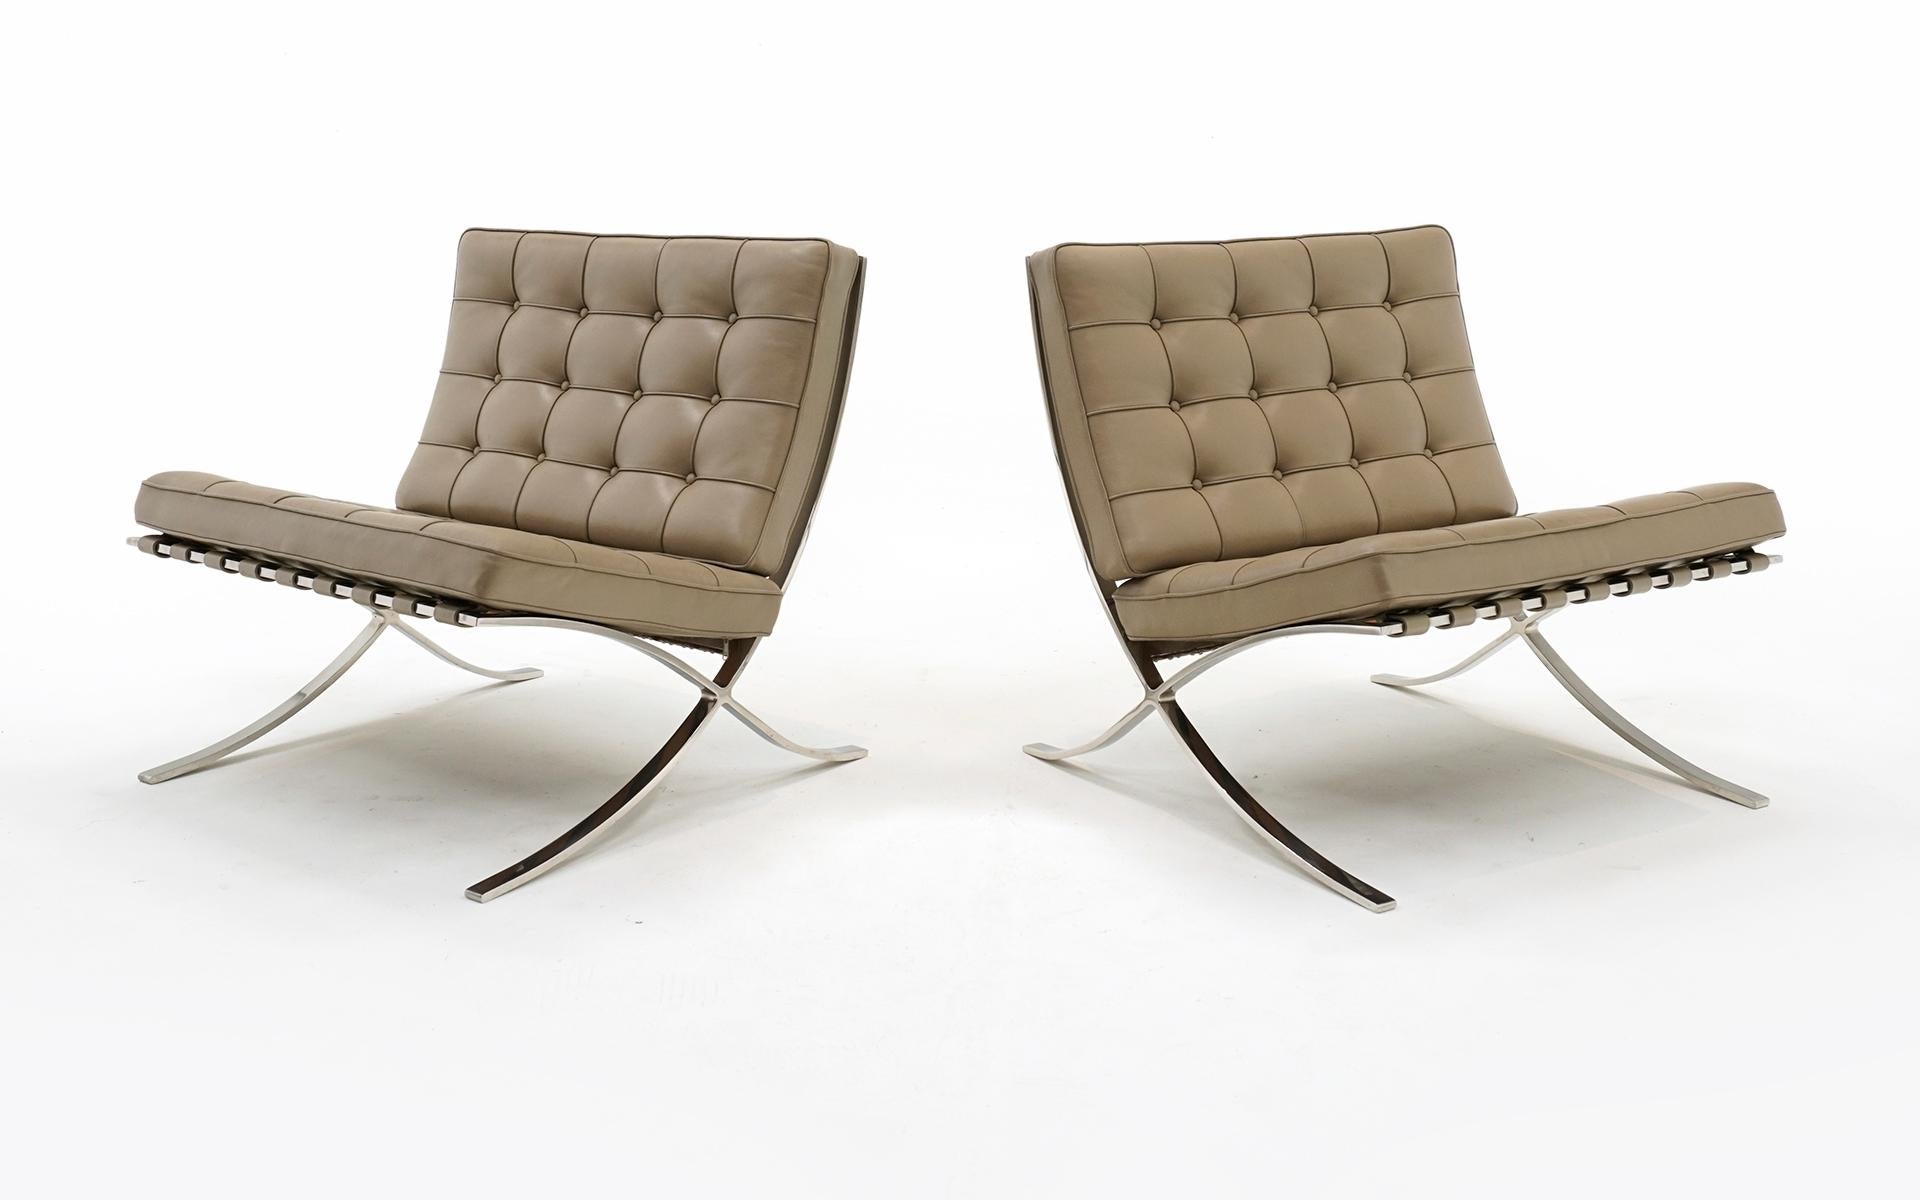 Knoll Barcelona Chairs by Ludwig Mies van der Rohe, Leather, Stainless Steel In Good Condition For Sale In Kansas City, MO